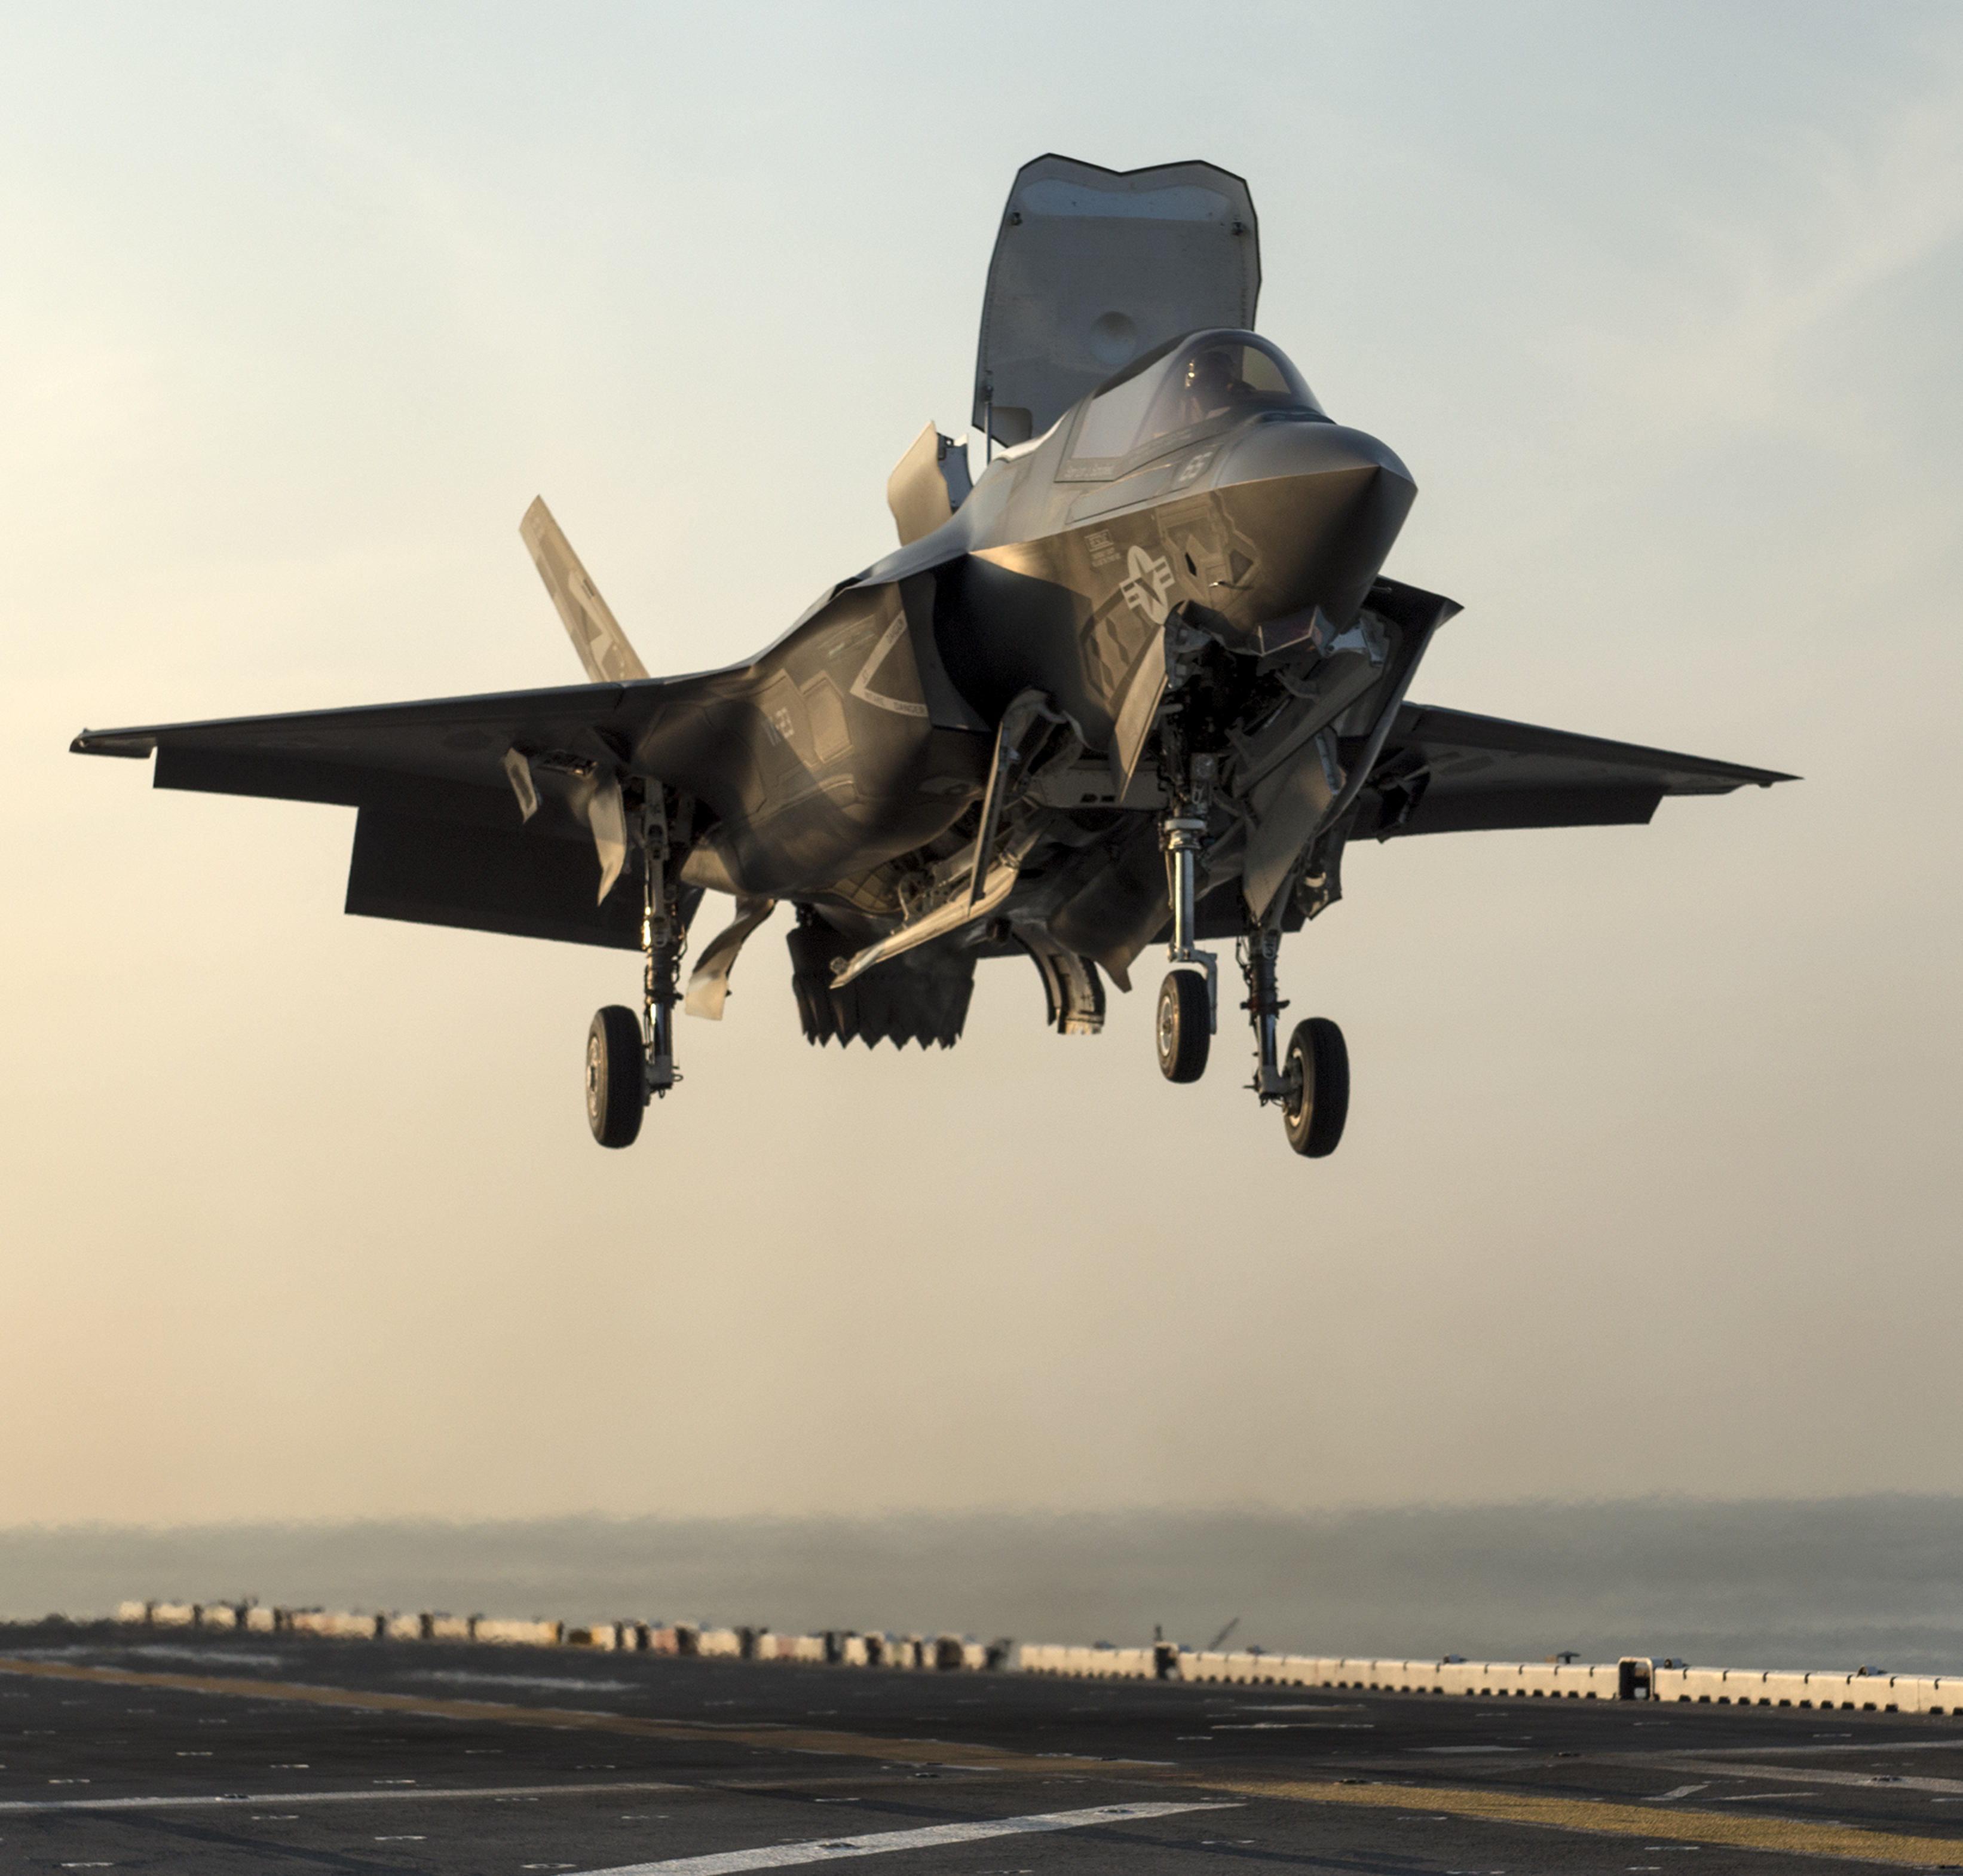 An F-35B Lightning II aircraft takes off from the amphibious assault ship USS Wasp (LHD-1). US Navy Photo